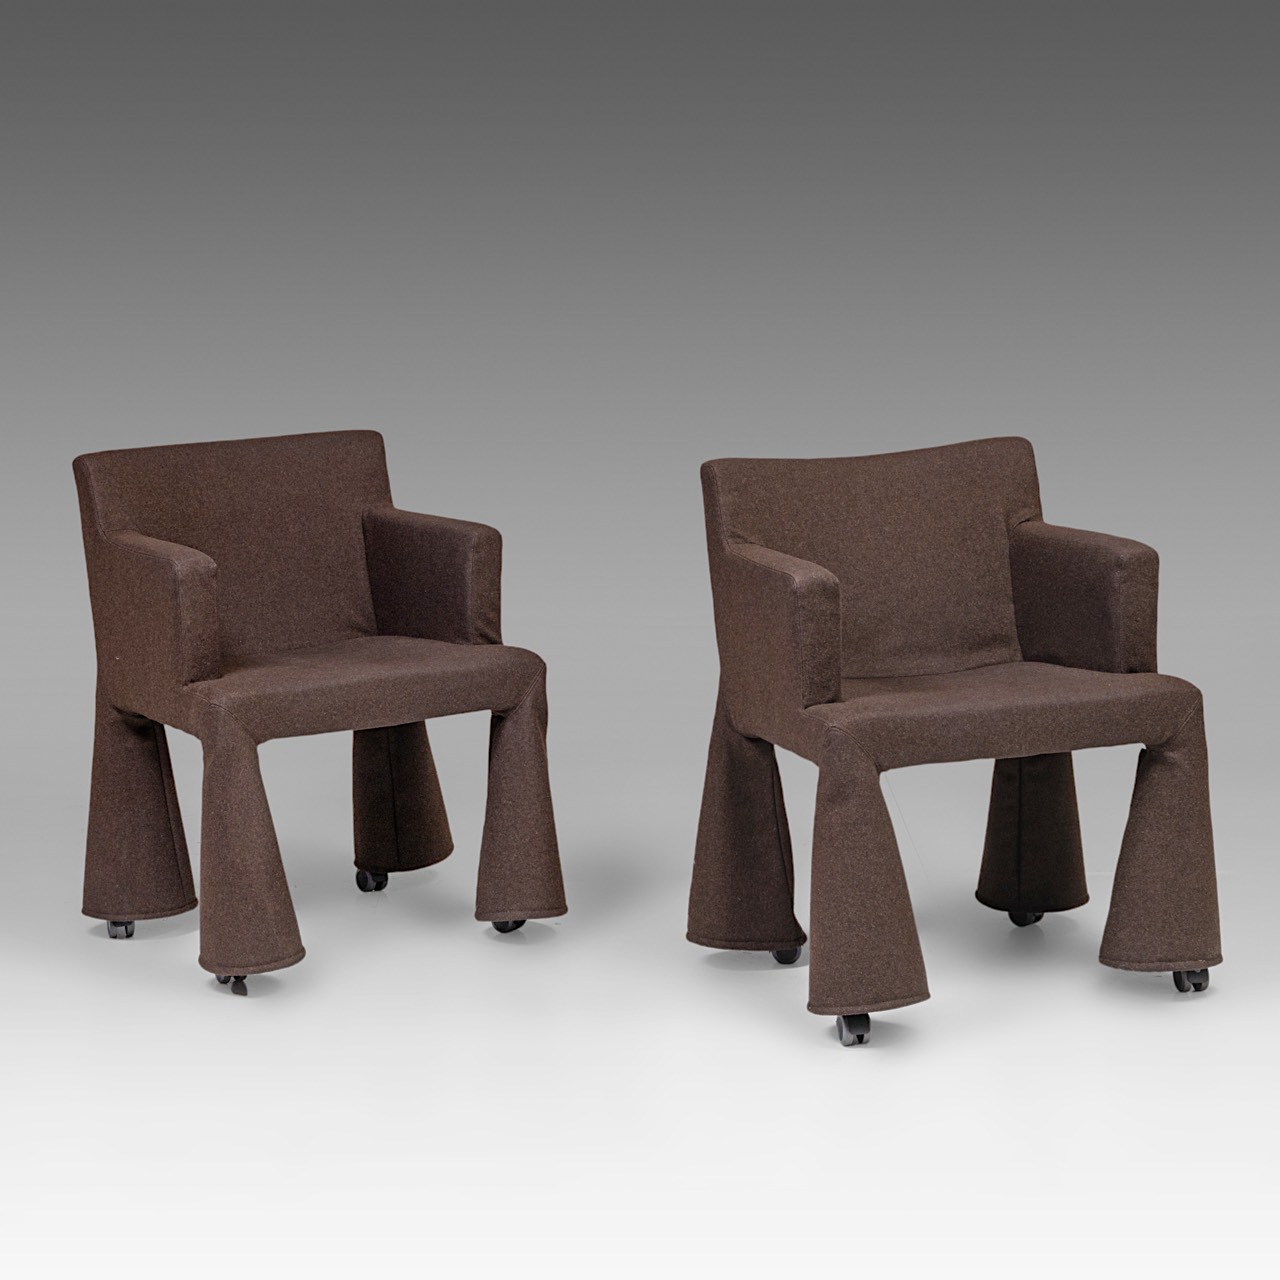 A pair of 'VIP' chairs by Marcel Wanders, the Netherlands, 2000, H 82 - W 60 cm